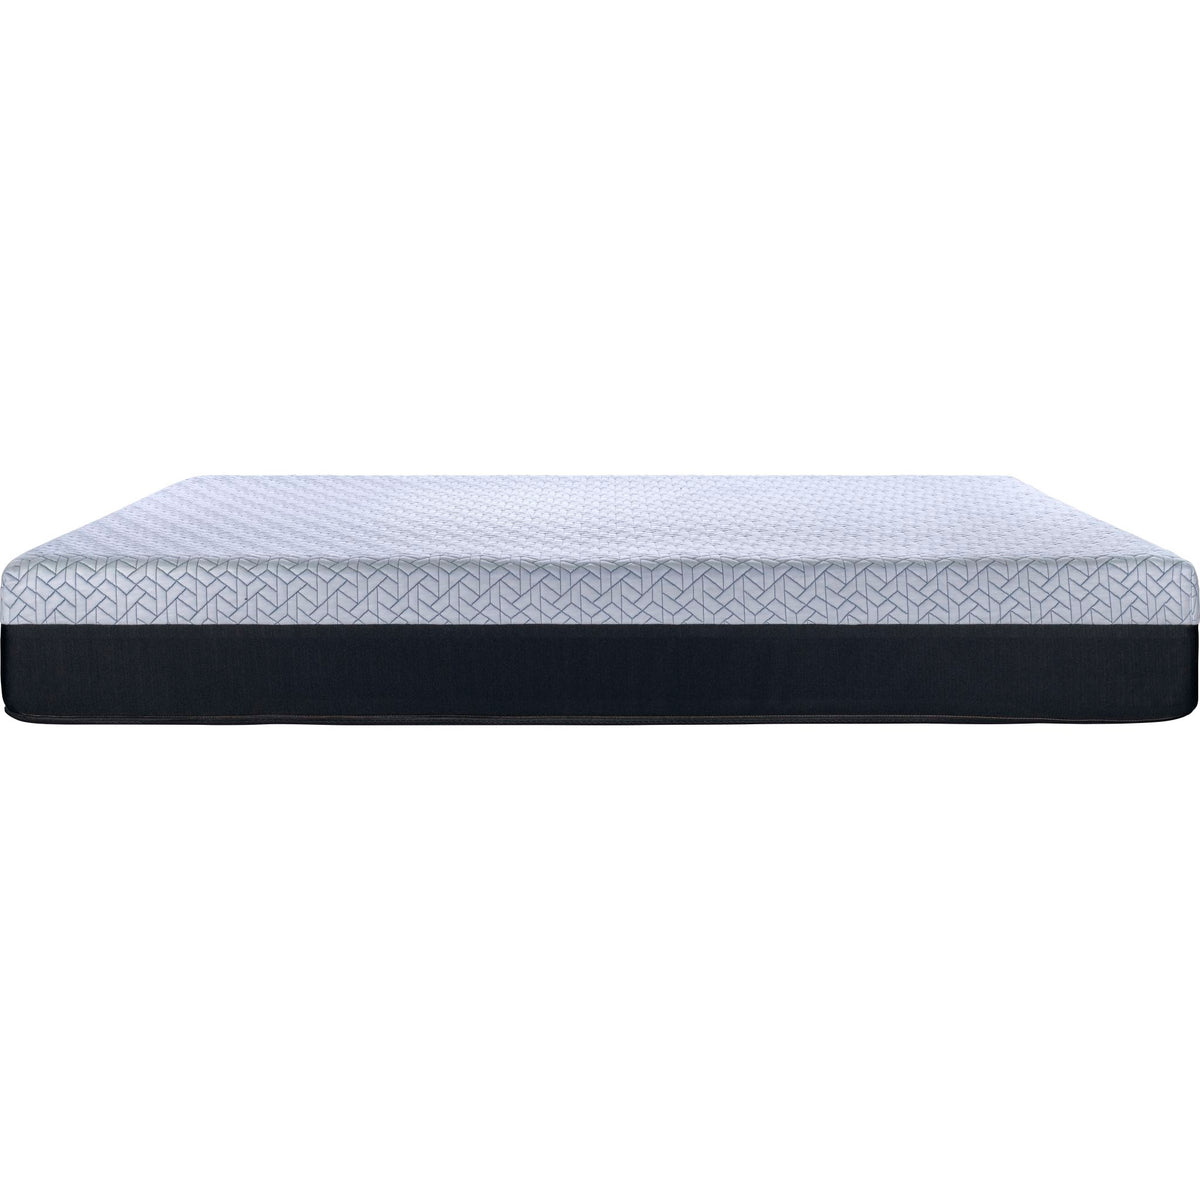 Sealy Mirrorform I Memory Foam 9 inch Mattress | Dufresne Furniture and ...